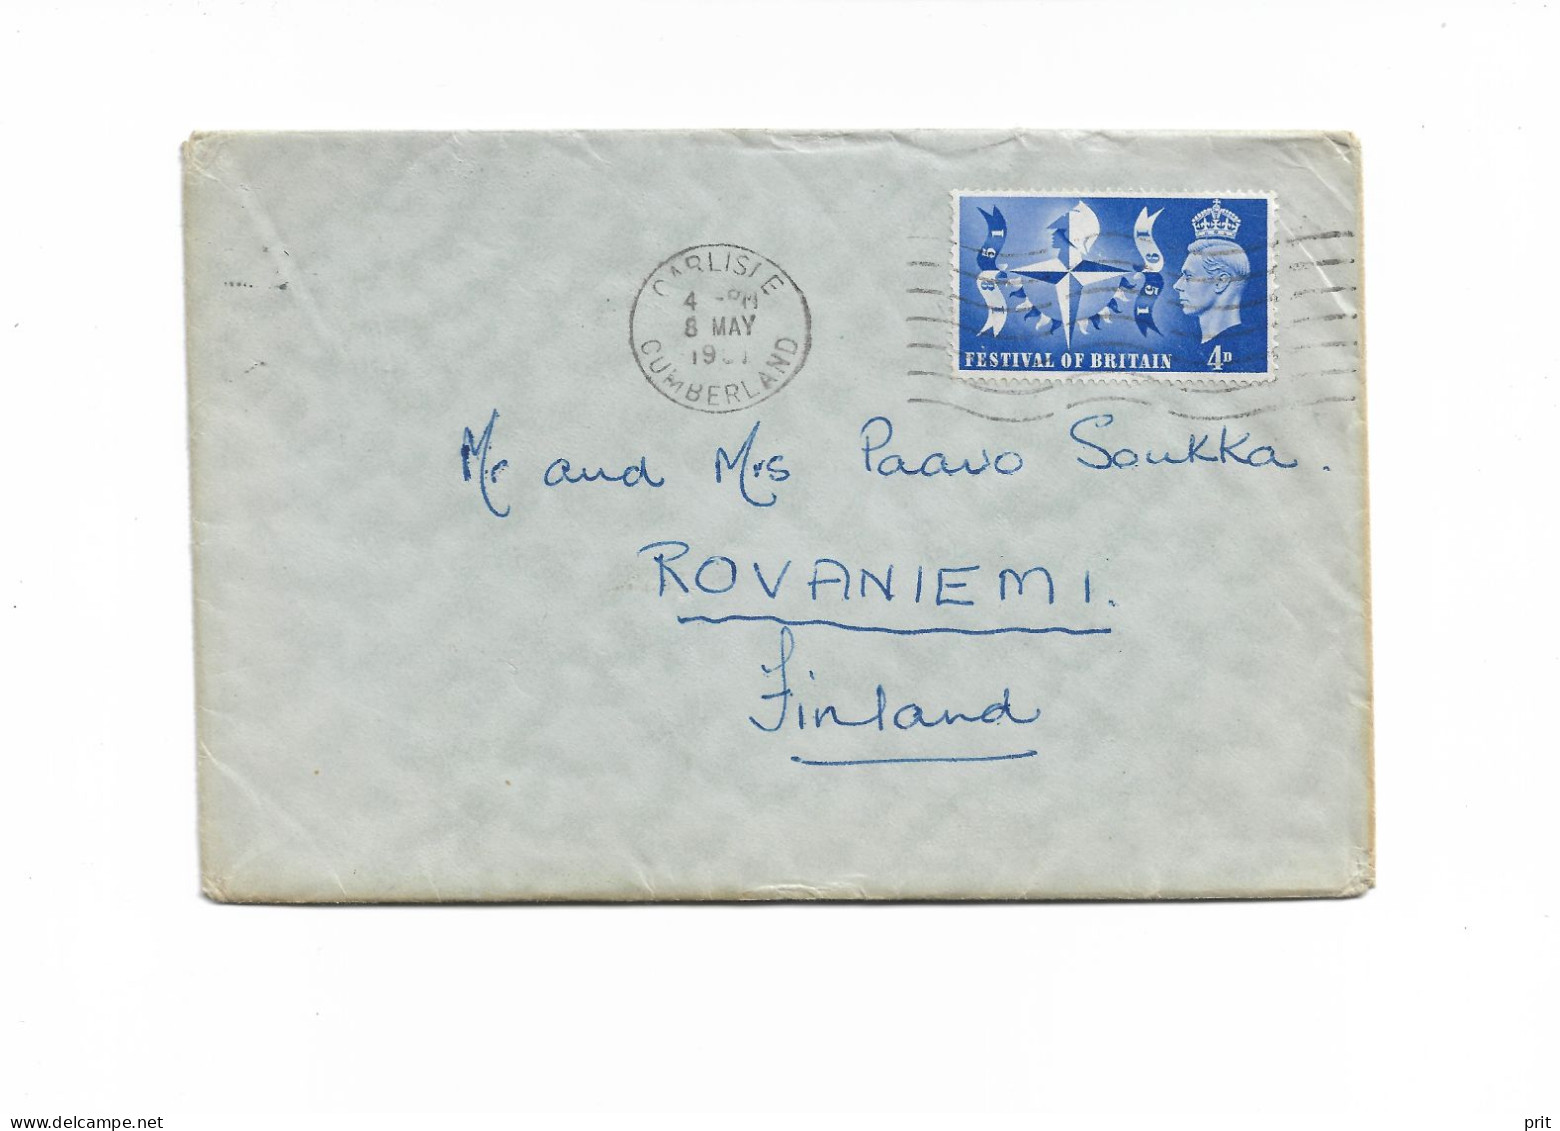 Carlisle Cumberland Great Britain Cover To Rovaniemi Lapland Finland 1951 George VI 4d - Covers & Documents